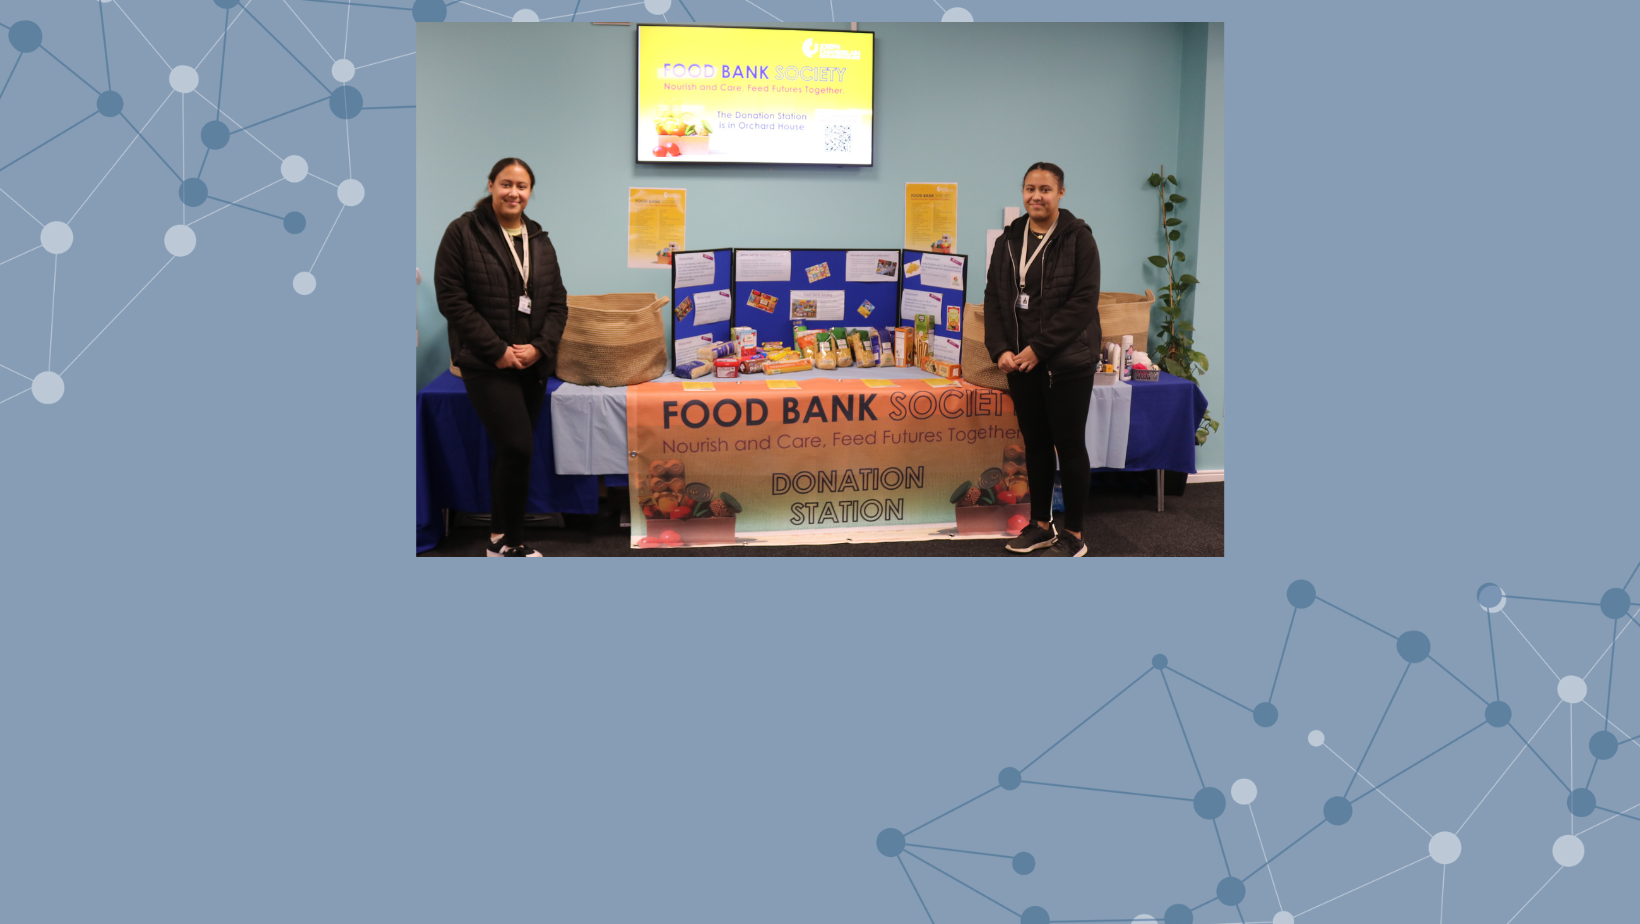 Link to JCC Extra Food Bank Society News Article